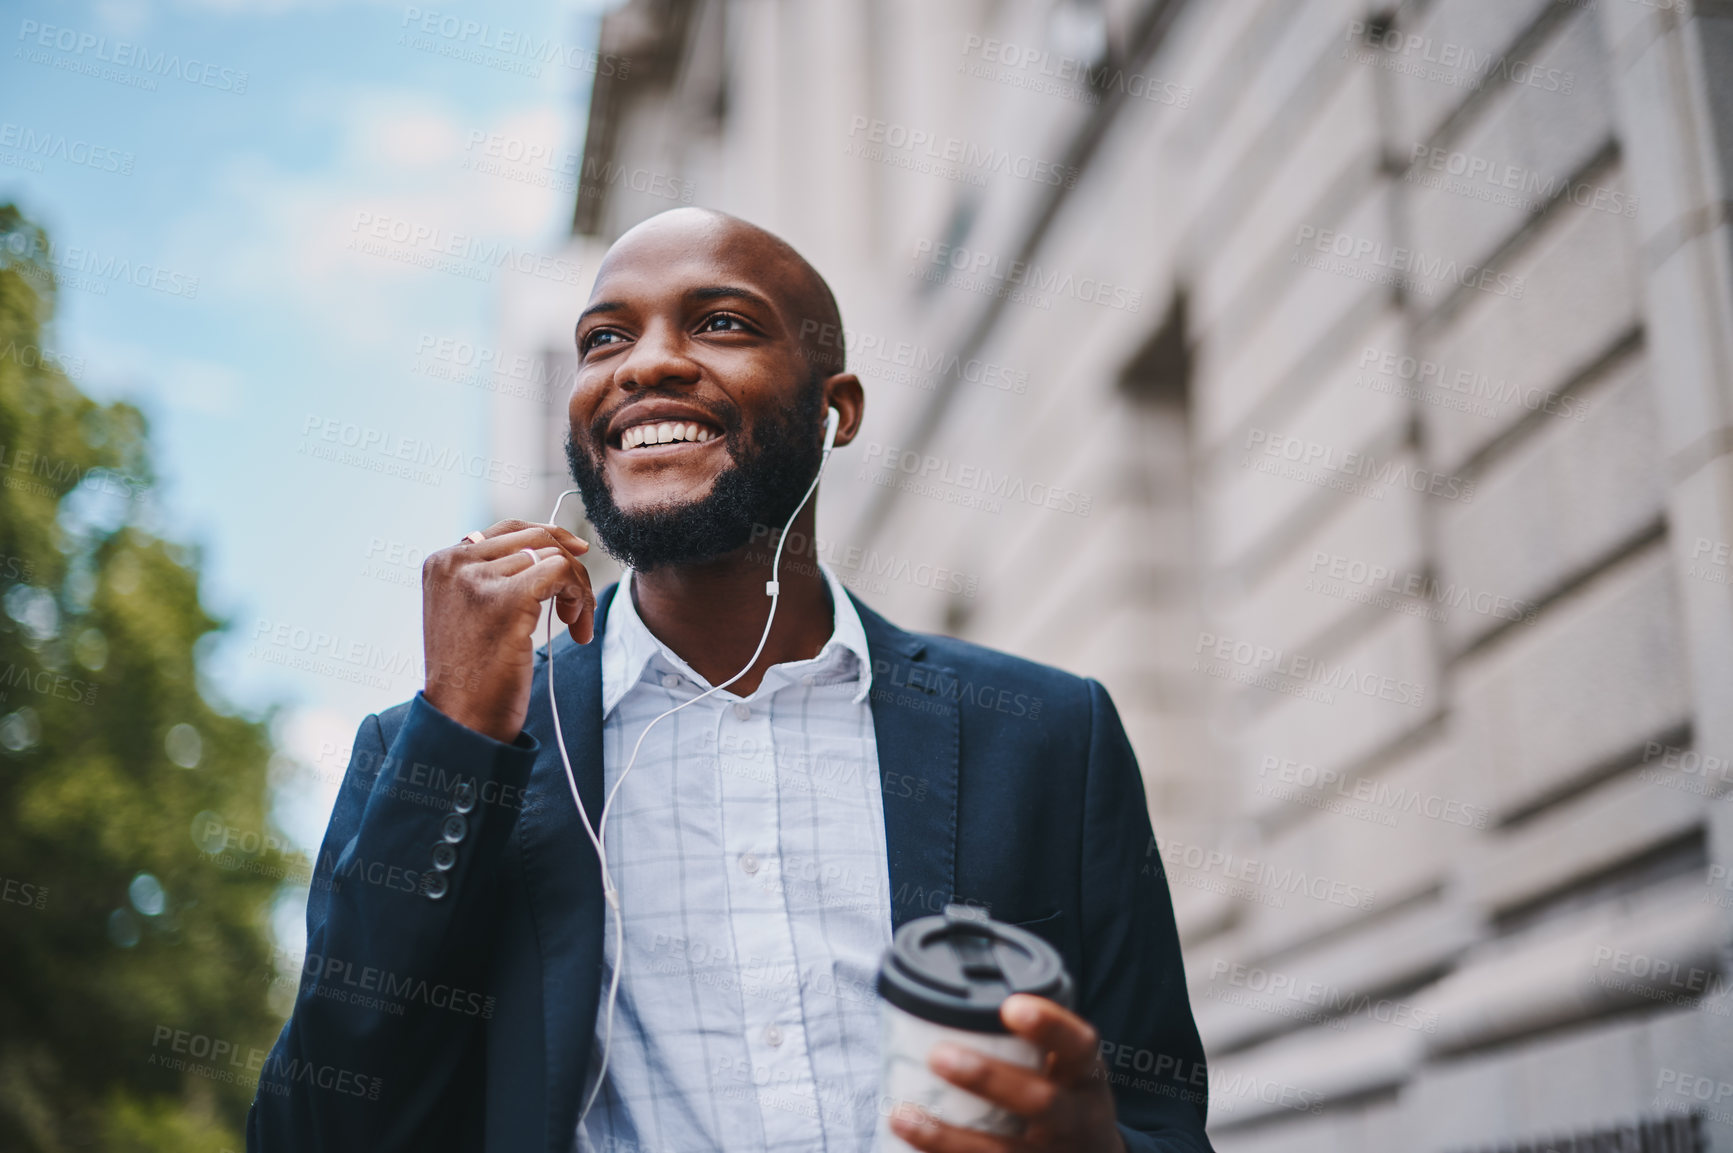 Buy stock photo Shot of a businessman holding a coffee and listening to music through earphones while walking through the city